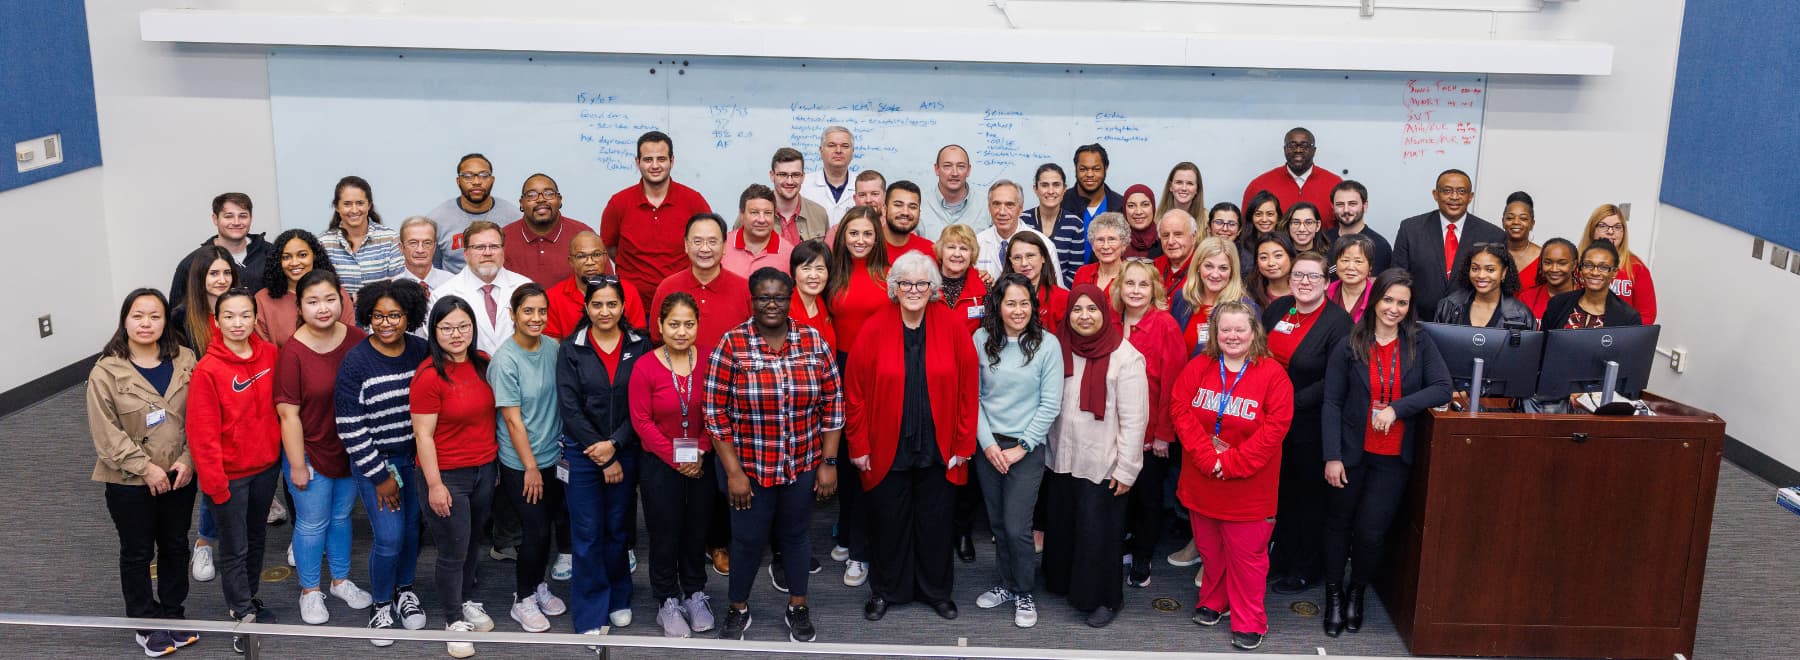 Group photo of Women's Health Research Center staff with many indiviudals dressed in red